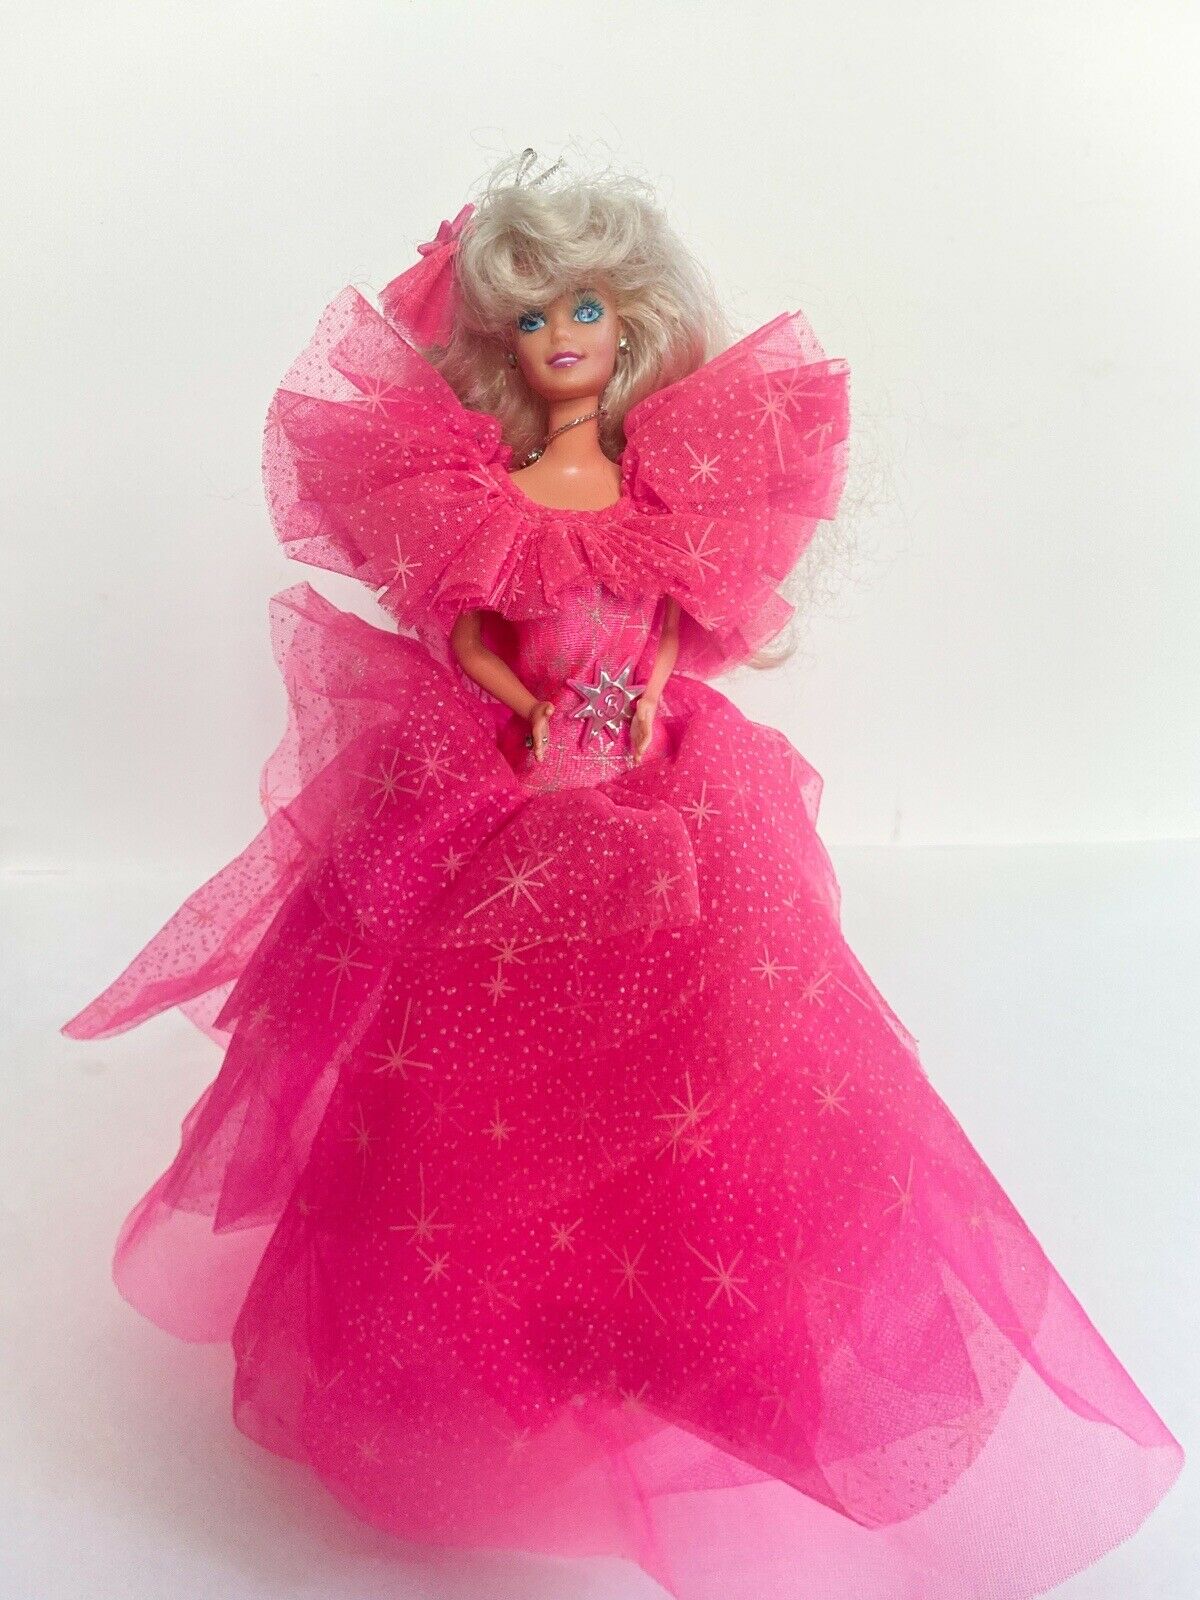 Happy Holidays Barbie 1990 Holiday Barbie Doll Mattel 11 1/2 In Pink Gown Blonde